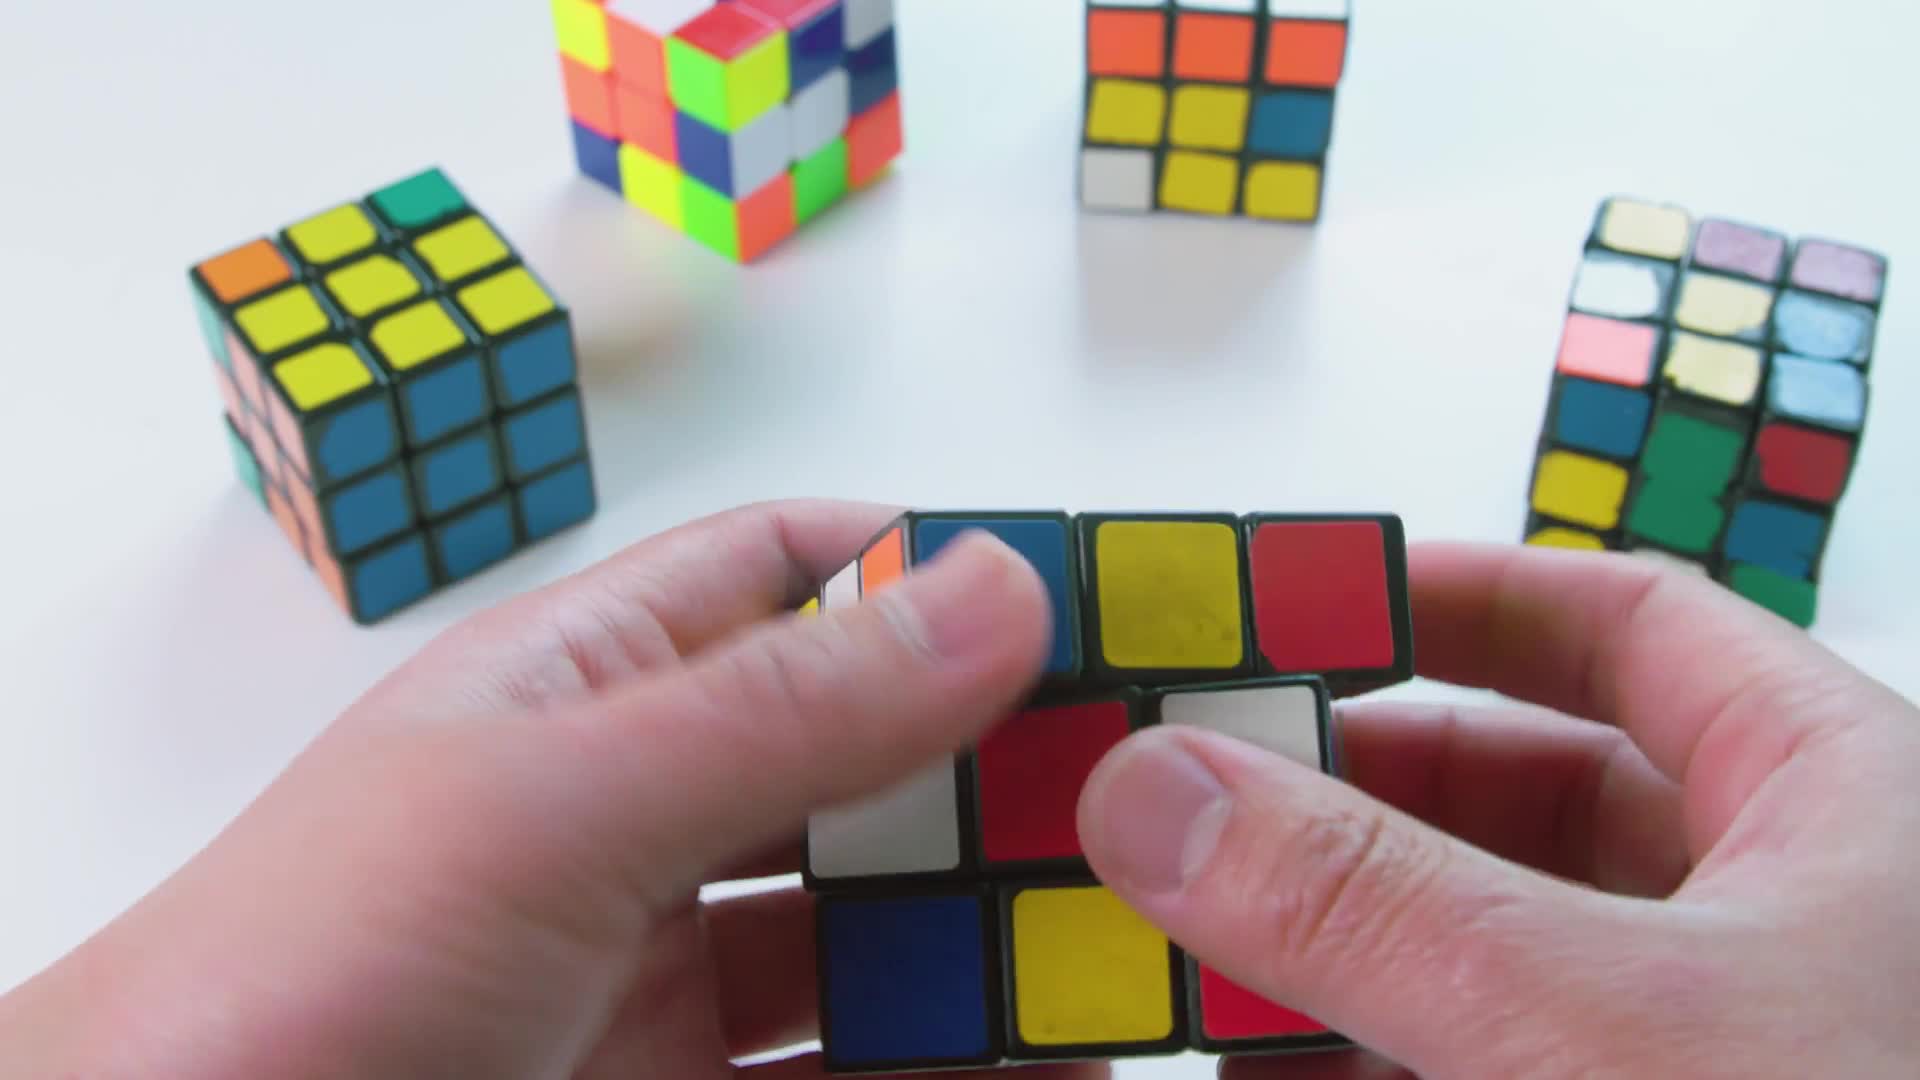 Why Solving a Rubik's Cube Under 3 Seconds is Almost Impossible | Impossible | WIRED